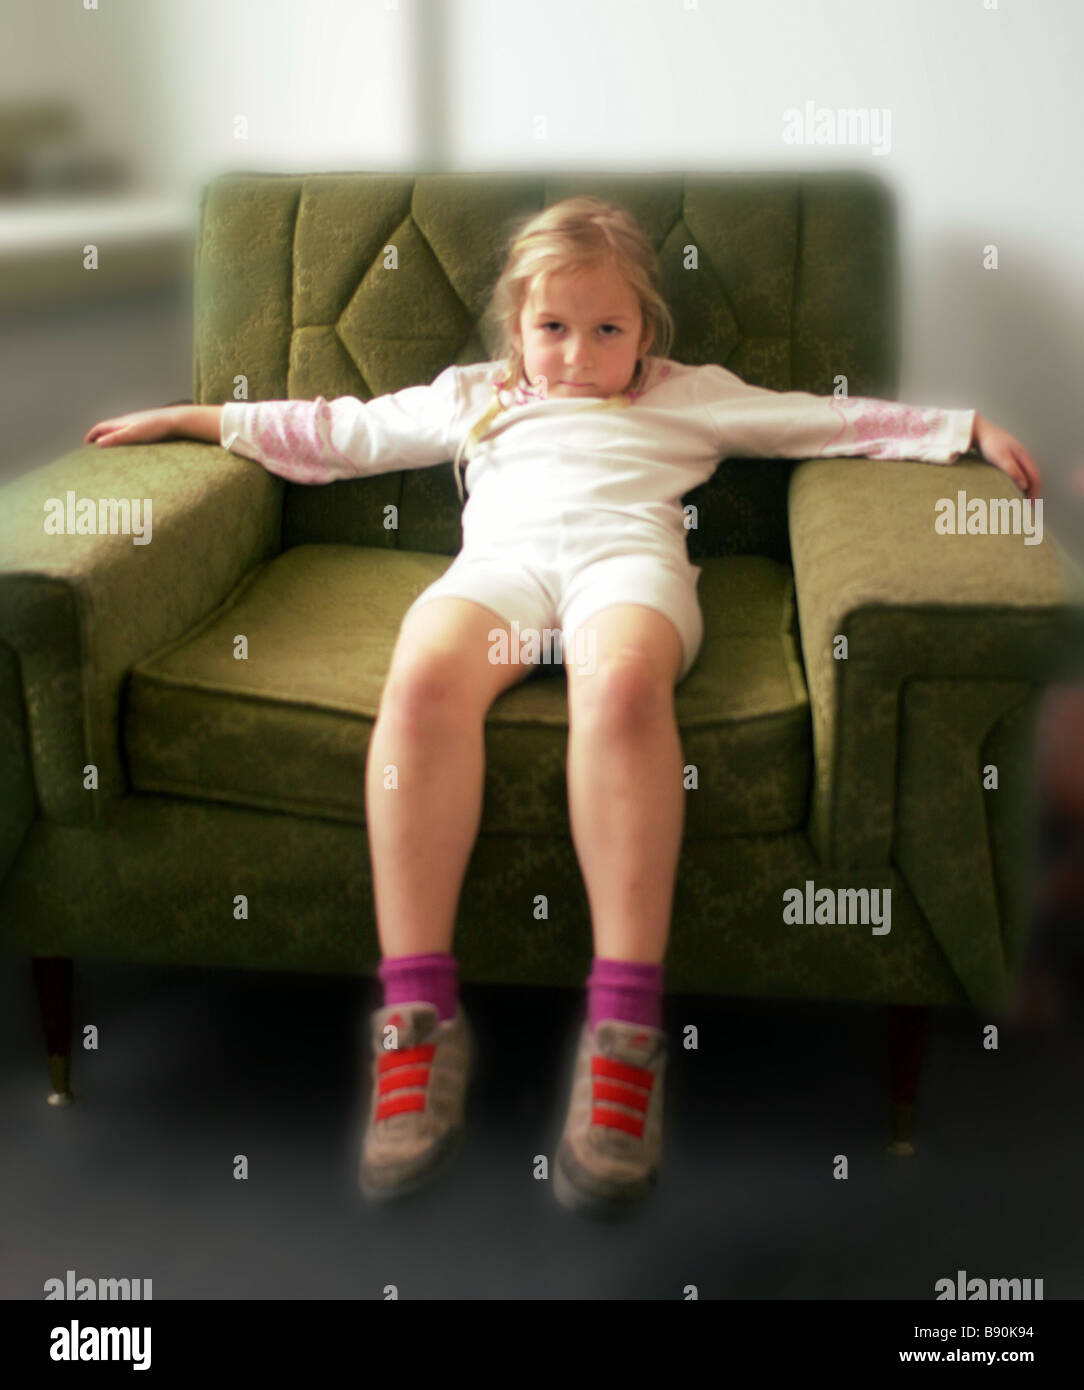 FL6090, Hot Digital Dog ; Girl Slouching Arm Chair, Waiting Impatiently Stock Photo